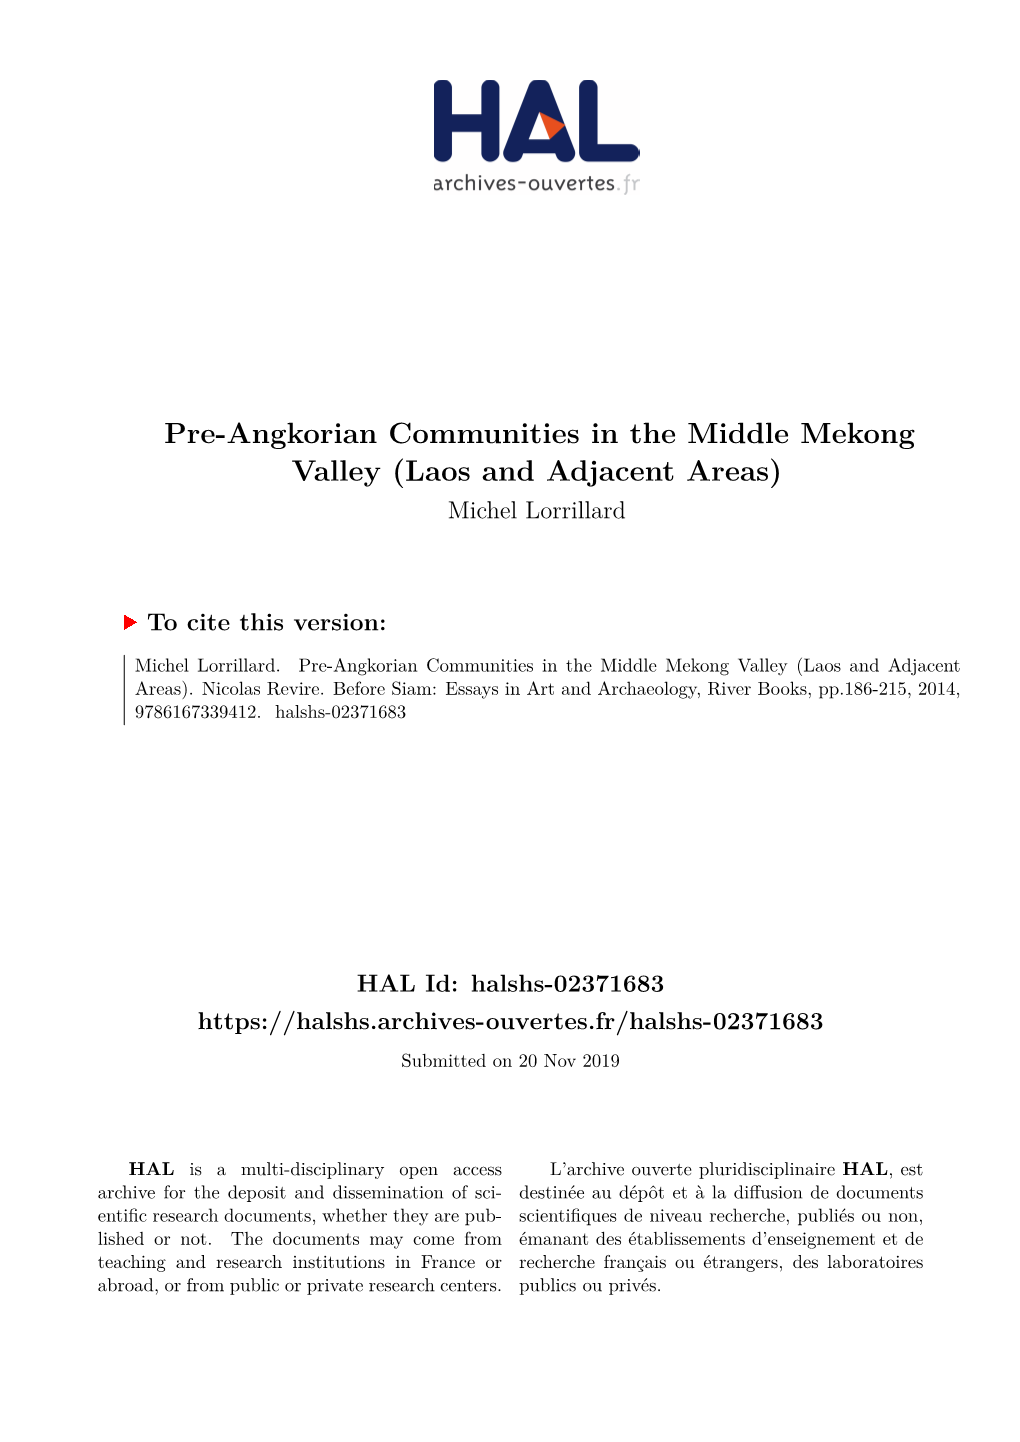 Pre-Angkorian Communities in the Middle Mekong Valley (Laos and Adjacent Areas) Michel Lorrillard